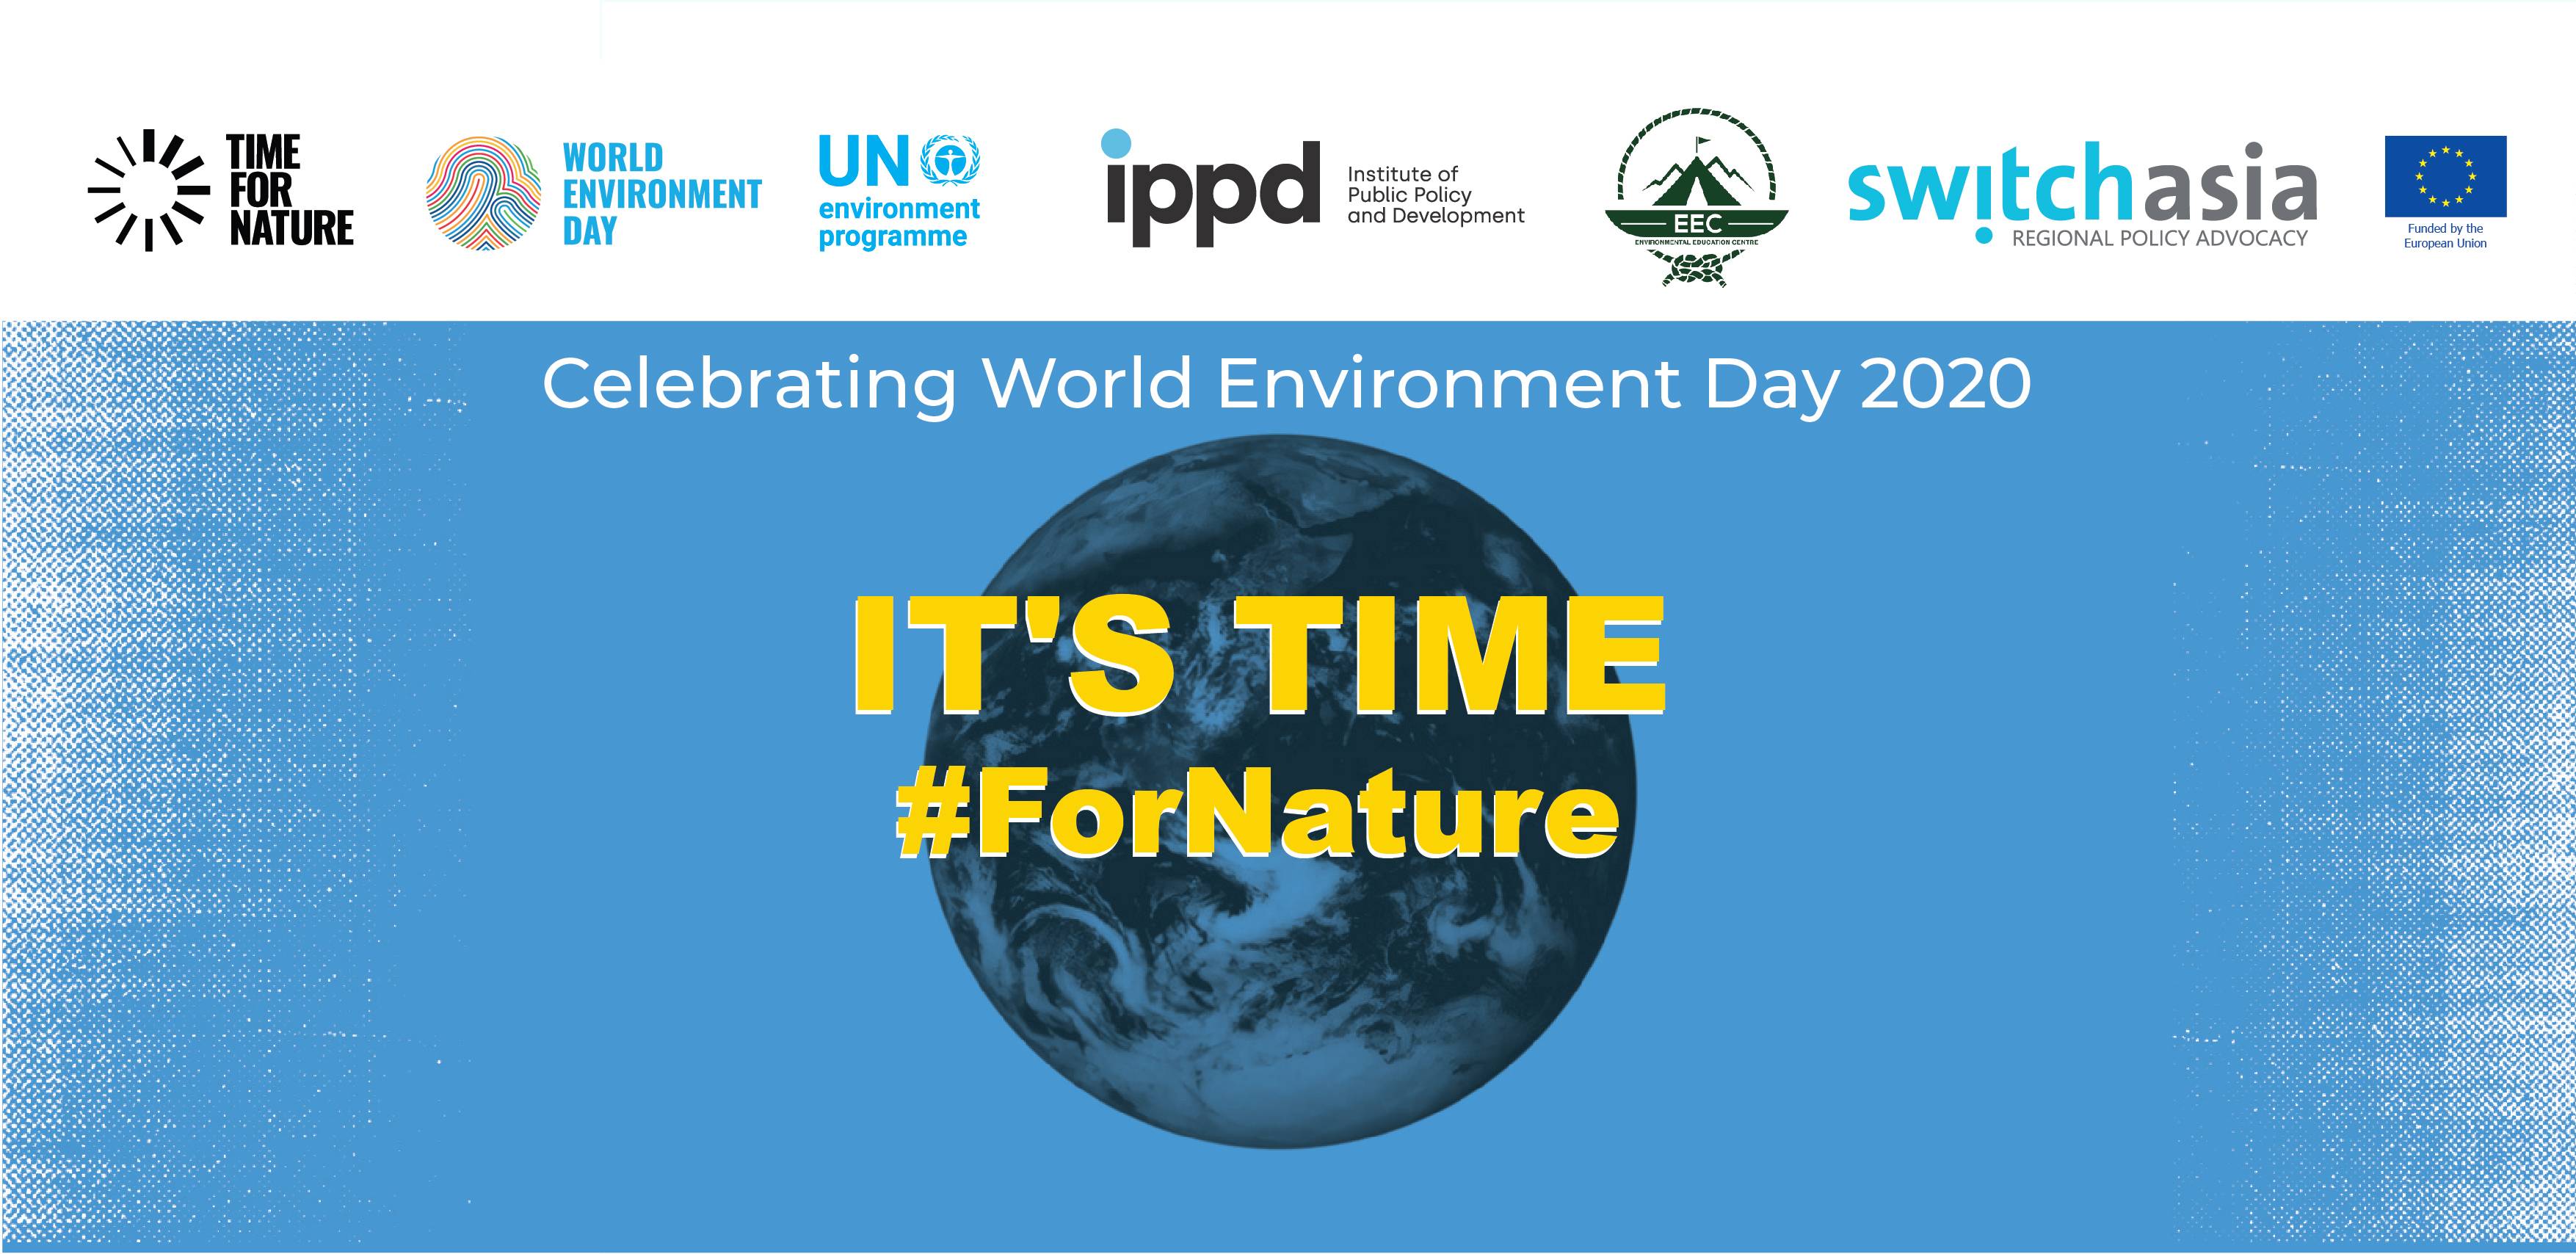 Press Release: World Environment Day 2020